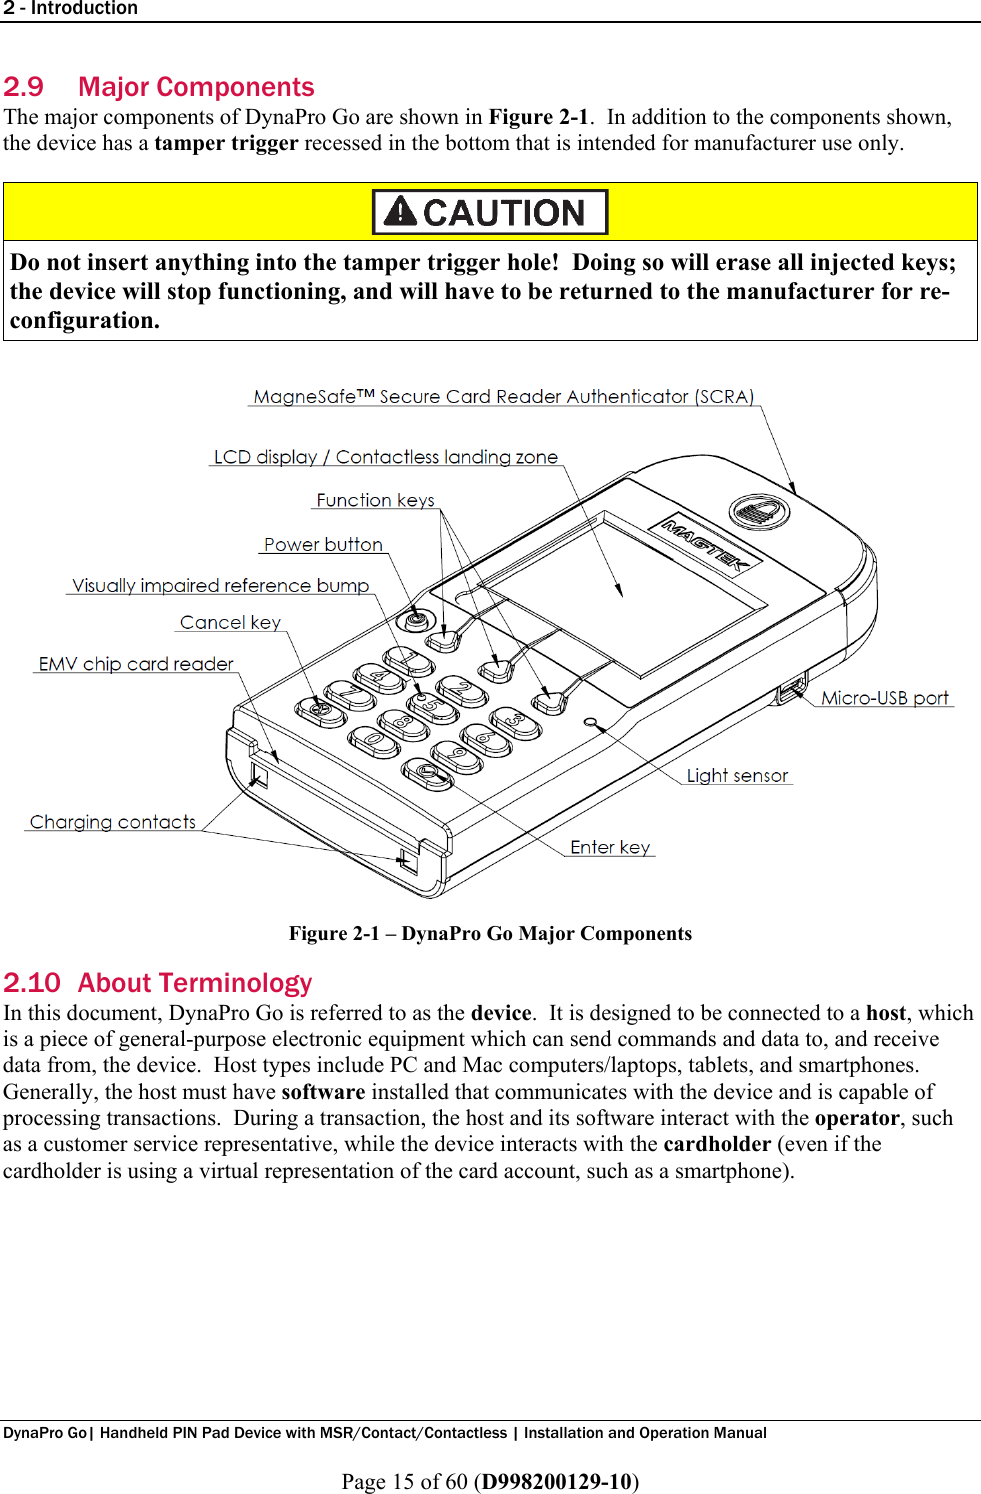 2 - Introduction  DynaPro Go| Handheld PIN Pad Device with MSR/Contact/Contactless | Installation and Operation Manual  Page 15 of 60 (D998200129-10) 2.9 Major Components The major components of DynaPro Go are shown in Figure 2-1.  In addition to the components shown, the device has a tamper trigger recessed in the bottom that is intended for manufacturer use only.   Do not insert anything into the tamper trigger hole!  Doing so will erase all injected keys; the device will stop functioning, and will have to be returned to the manufacturer for re-configuration.  Figure 2-1 – DynaPro Go Major Components 2.10 About Terminology In this document, DynaPro Go is referred to as the device.  It is designed to be connected to a host, which is a piece of general-purpose electronic equipment which can send commands and data to, and receive data from, the device.  Host types include PC and Mac computers/laptops, tablets, and smartphones.  Generally, the host must have software installed that communicates with the device and is capable of processing transactions.  During a transaction, the host and its software interact with the operator, such as a customer service representative, while the device interacts with the cardholder (even if the cardholder is using a virtual representation of the card account, such as a smartphone).     